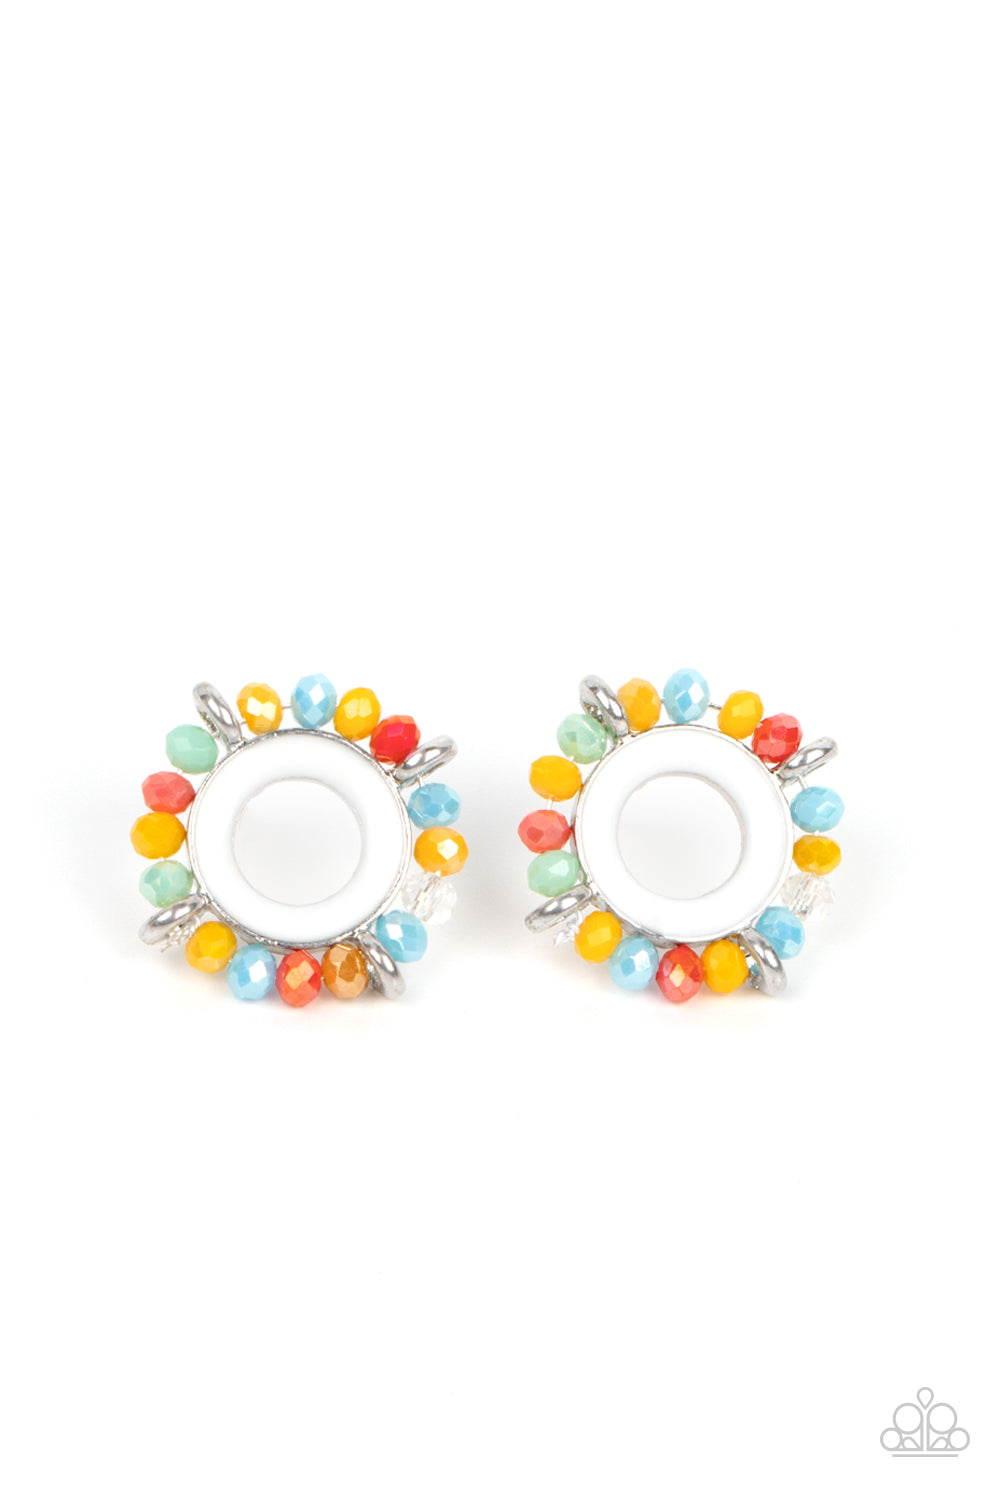 Paparazzi - Nautical Notion - Multi-Color - Featuring dainty silver accents, a ring of multicolored crystal-like beads encircles a silver ring painted in a shiny white finish for a nautical inspired look.